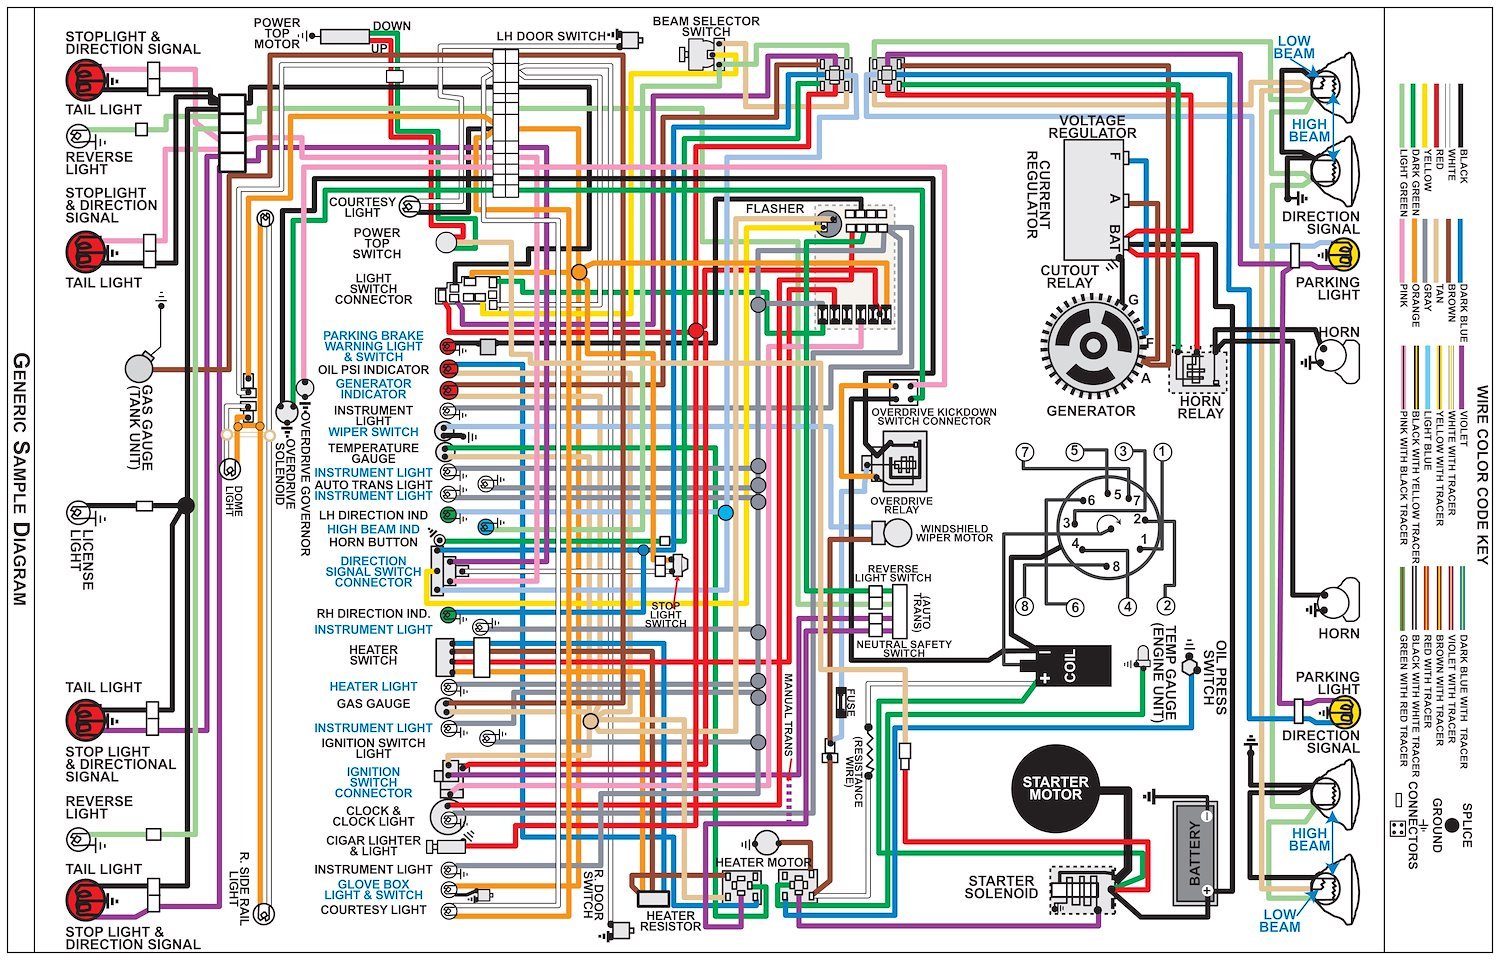 Wiring Diagram for 1960 Chevy Truck, 11 in. x 17 in., Laminated